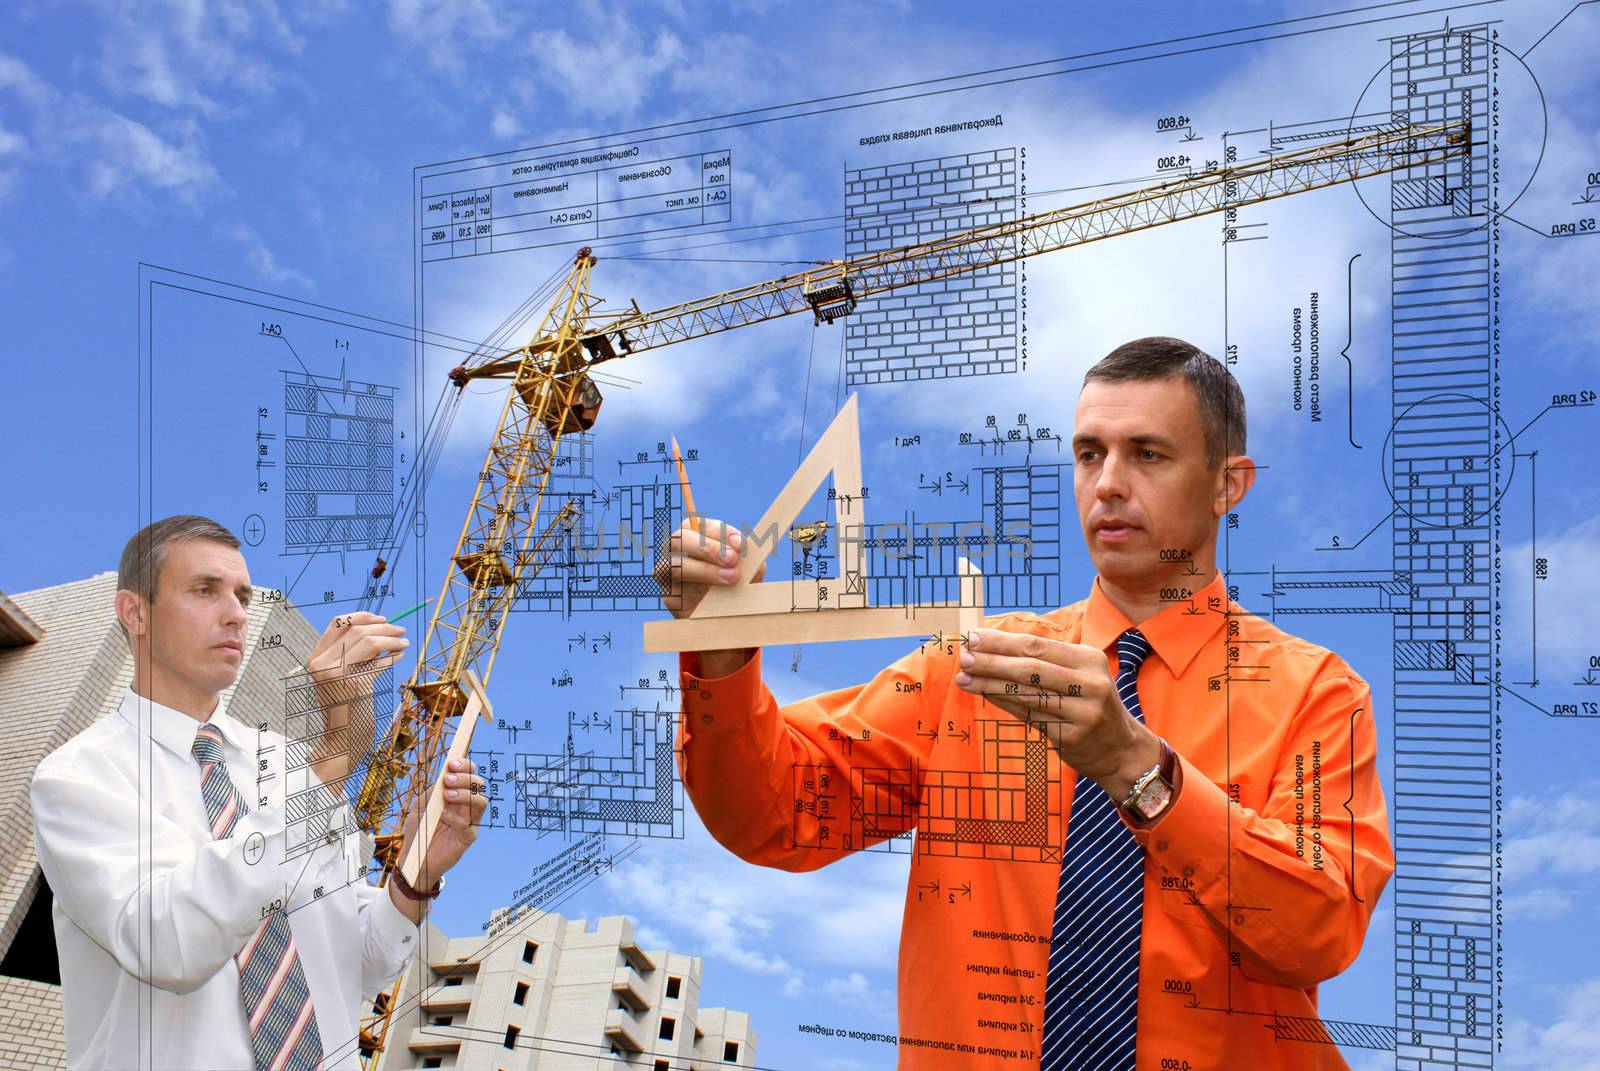 the collective of engineers-designers is carried out by construction plans 